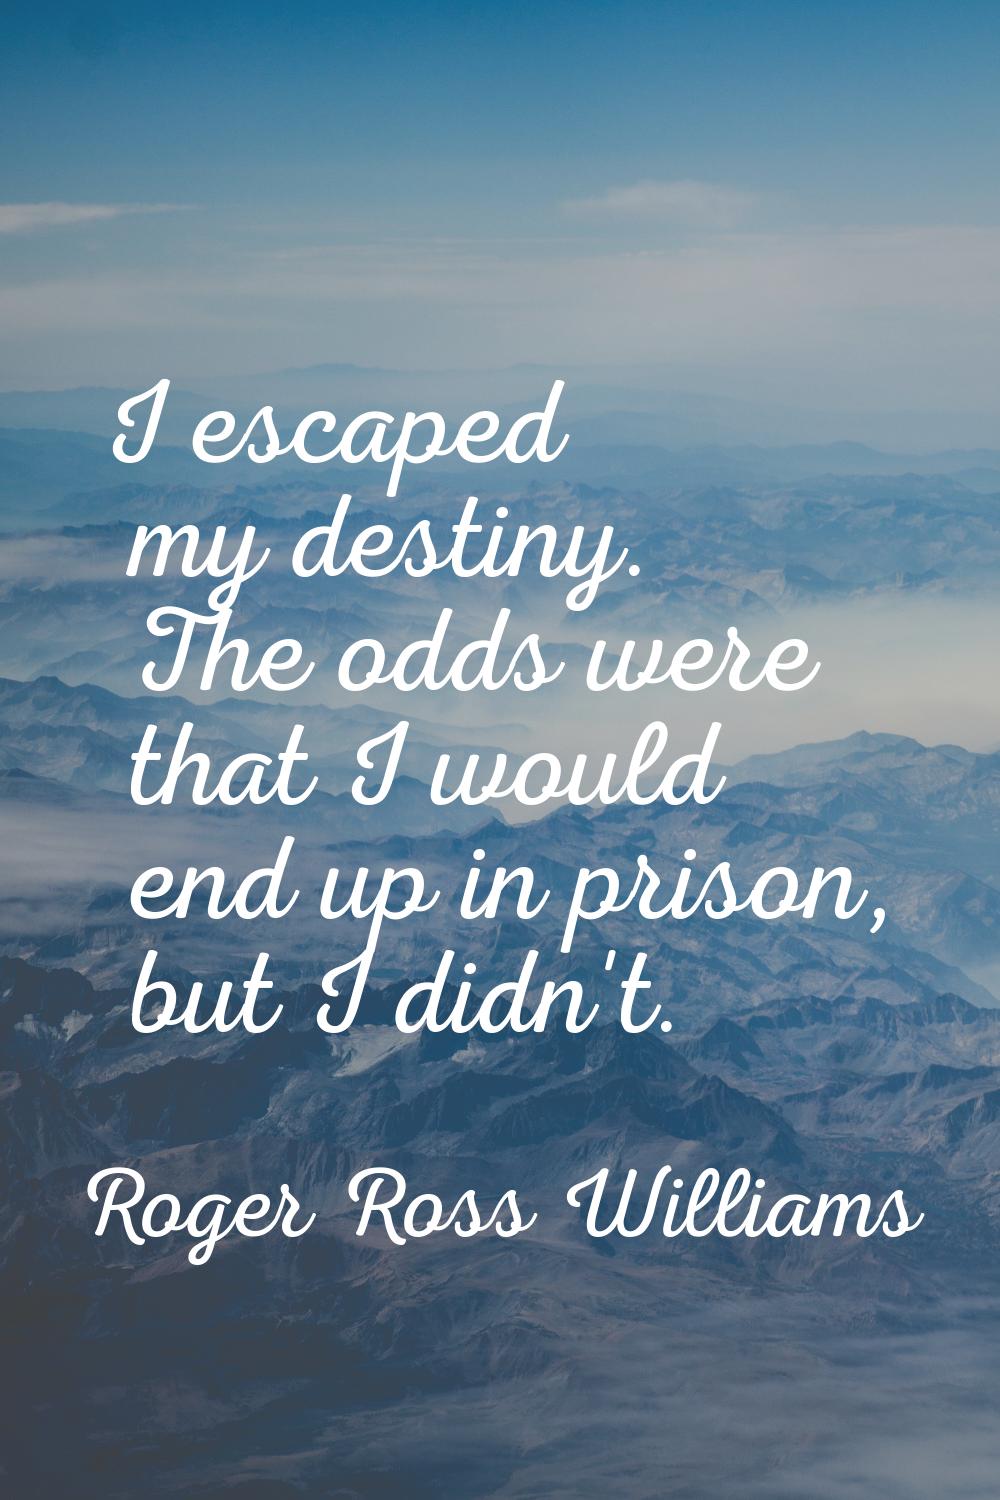 I escaped my destiny. The odds were that I would end up in prison, but I didn't.